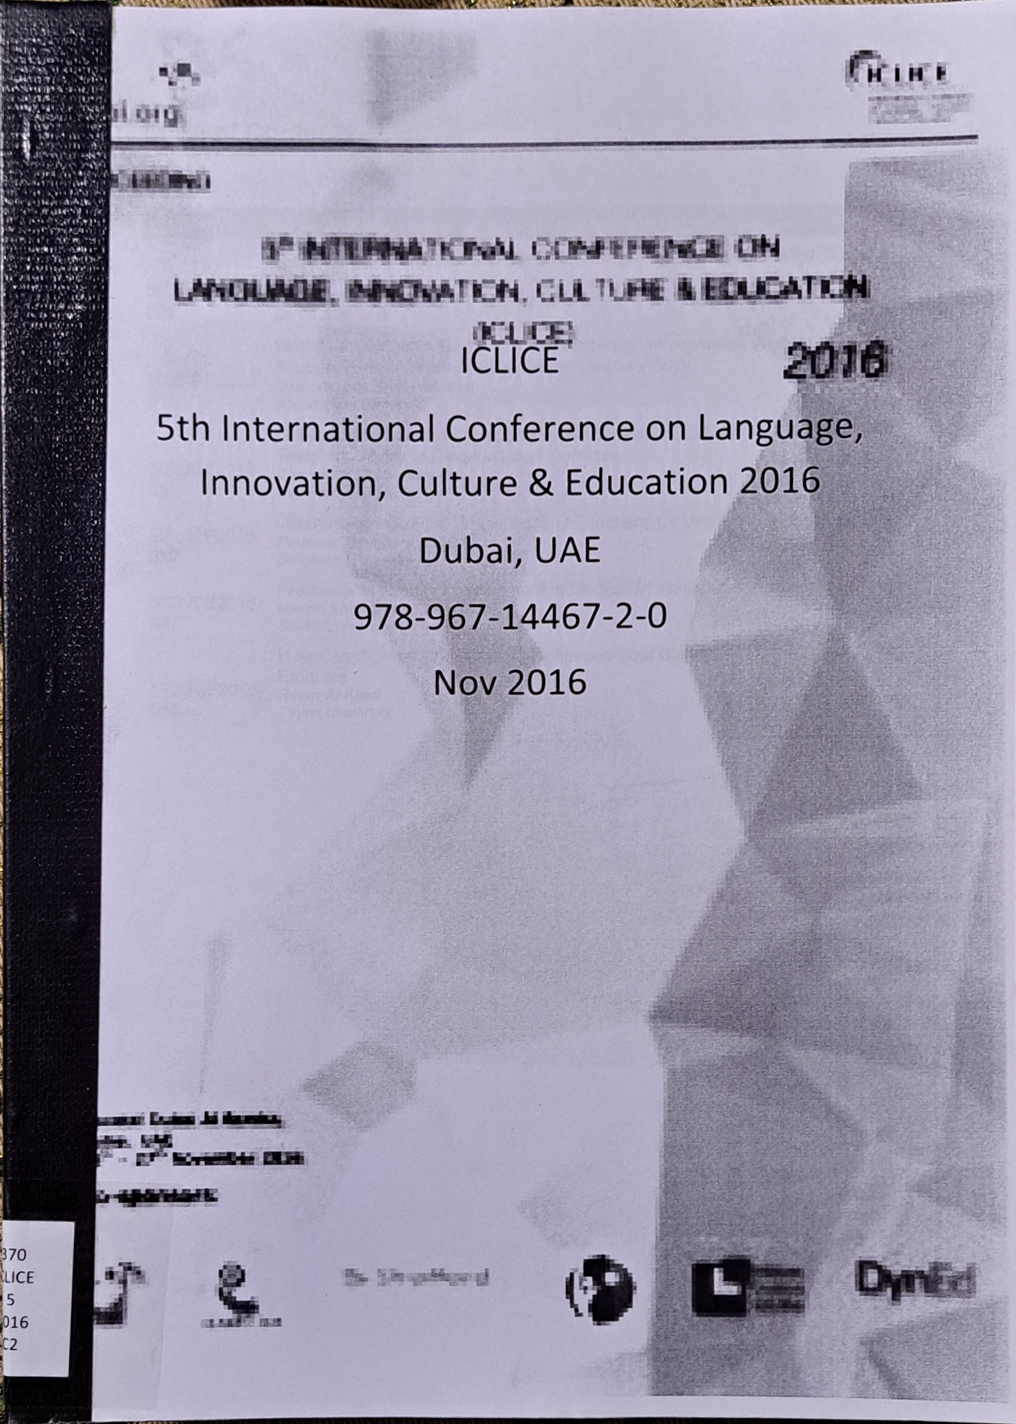 Cover image for 5th International conference on language, innovation, culture and education 2016 Dubai, UAE (ICLICE) / Oct 2016 bibliographic